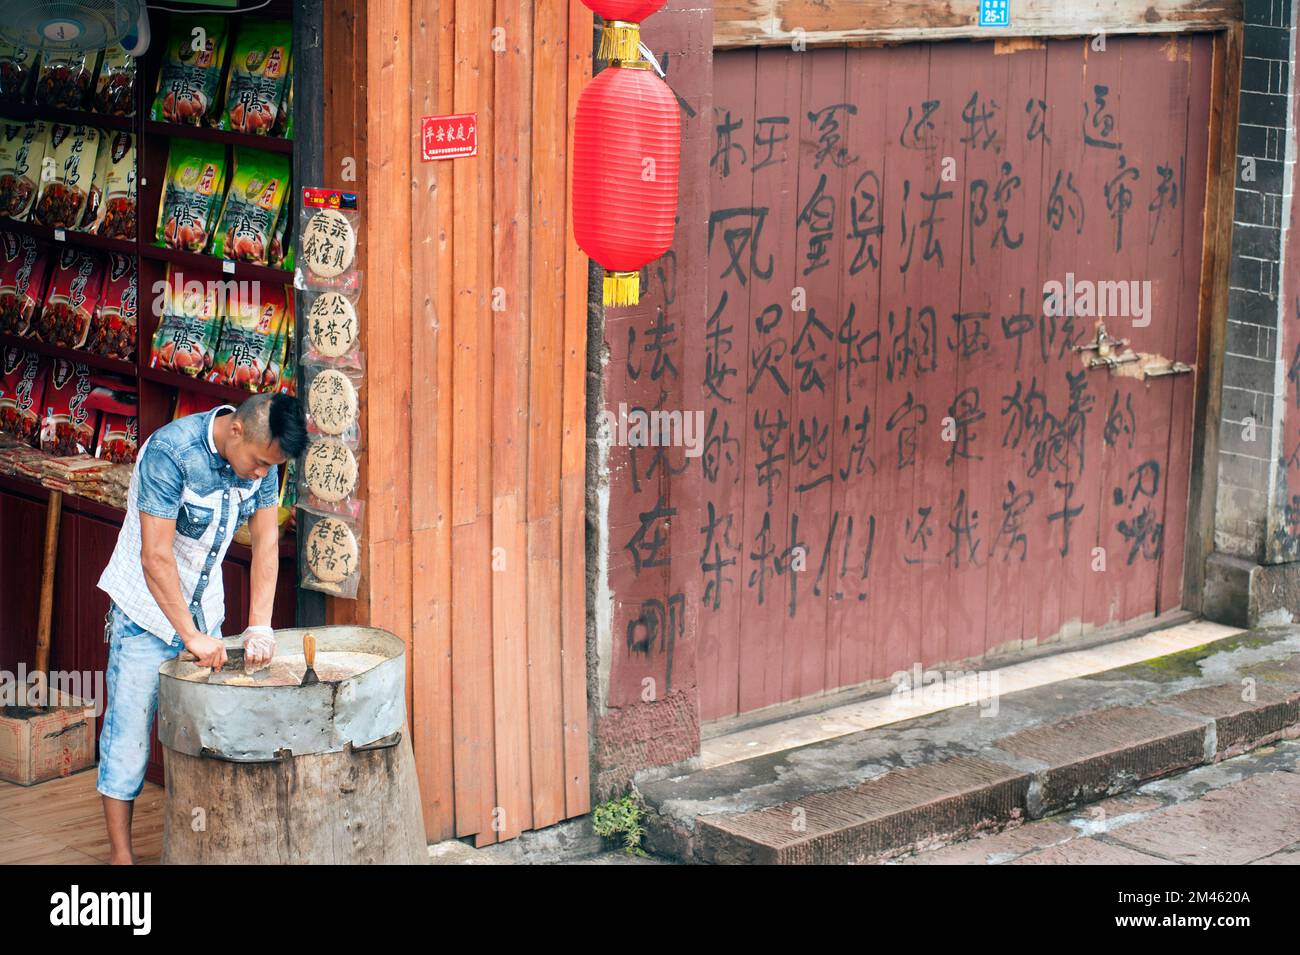 The seller shows that making hit nuts to sheet on shop in Fenghuang old town , China. This ancient town was added to the UNESCO World Heritage.rub Stock Photo